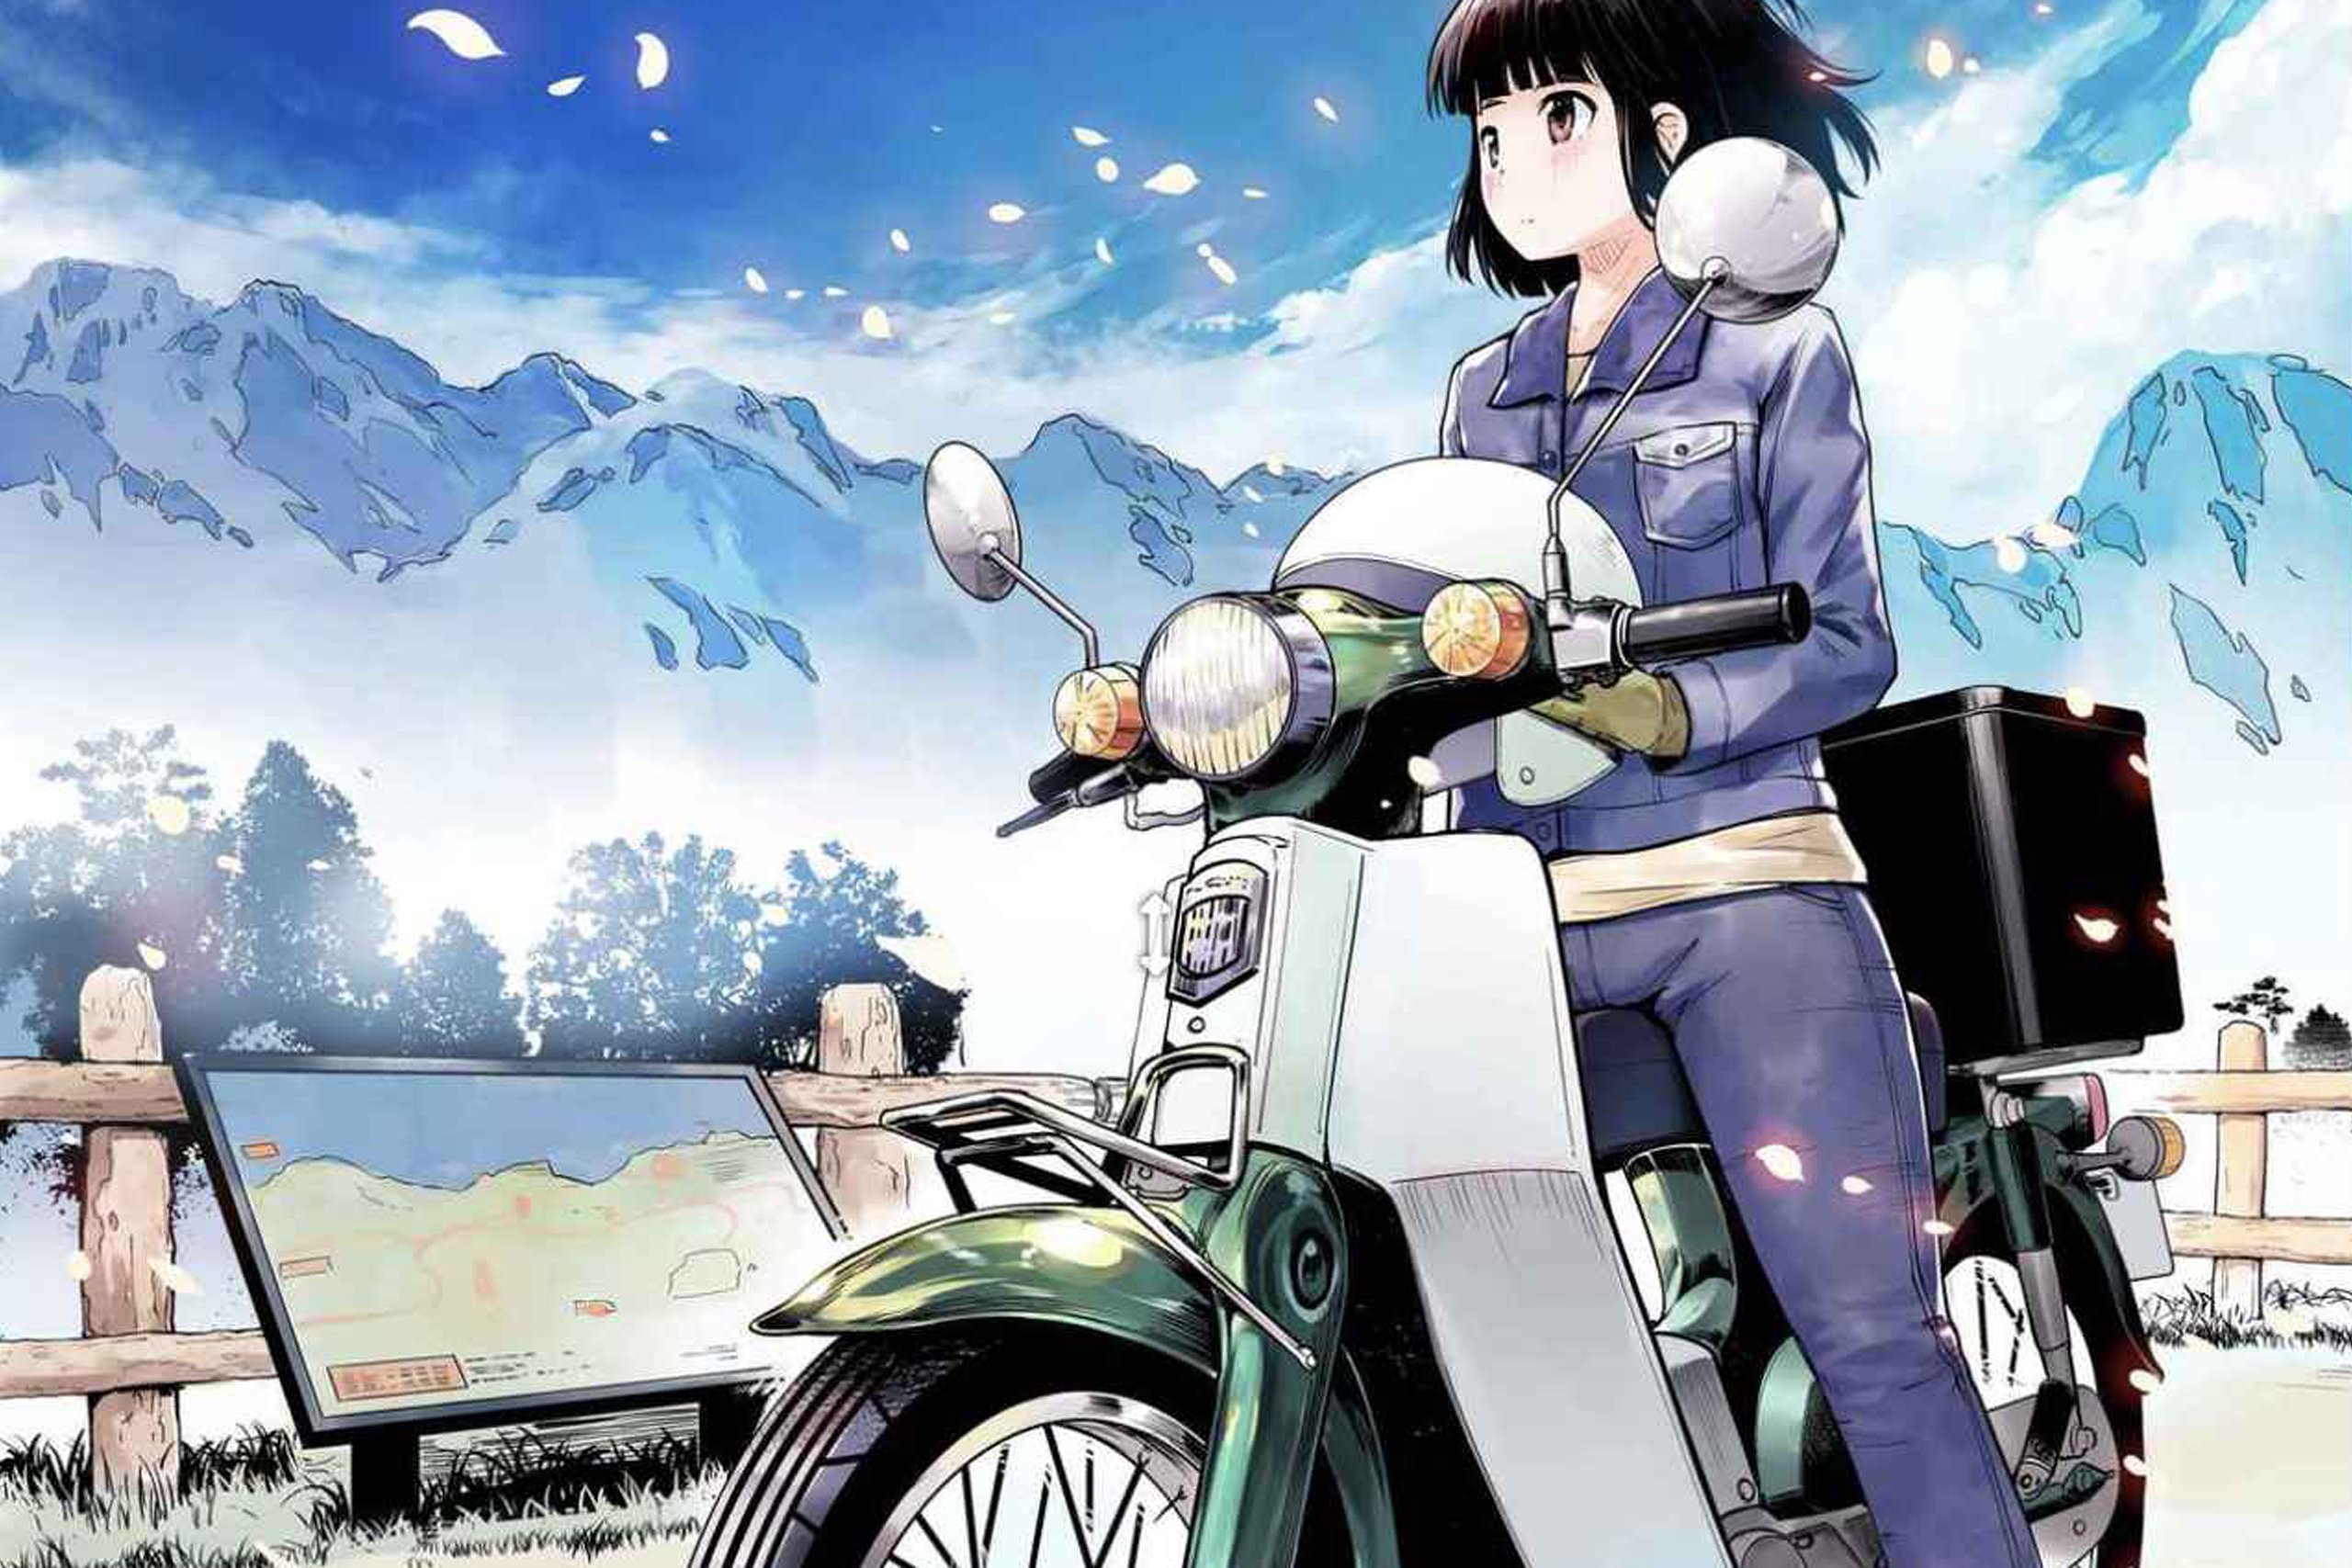 Super Cub anime adaptation has been announced